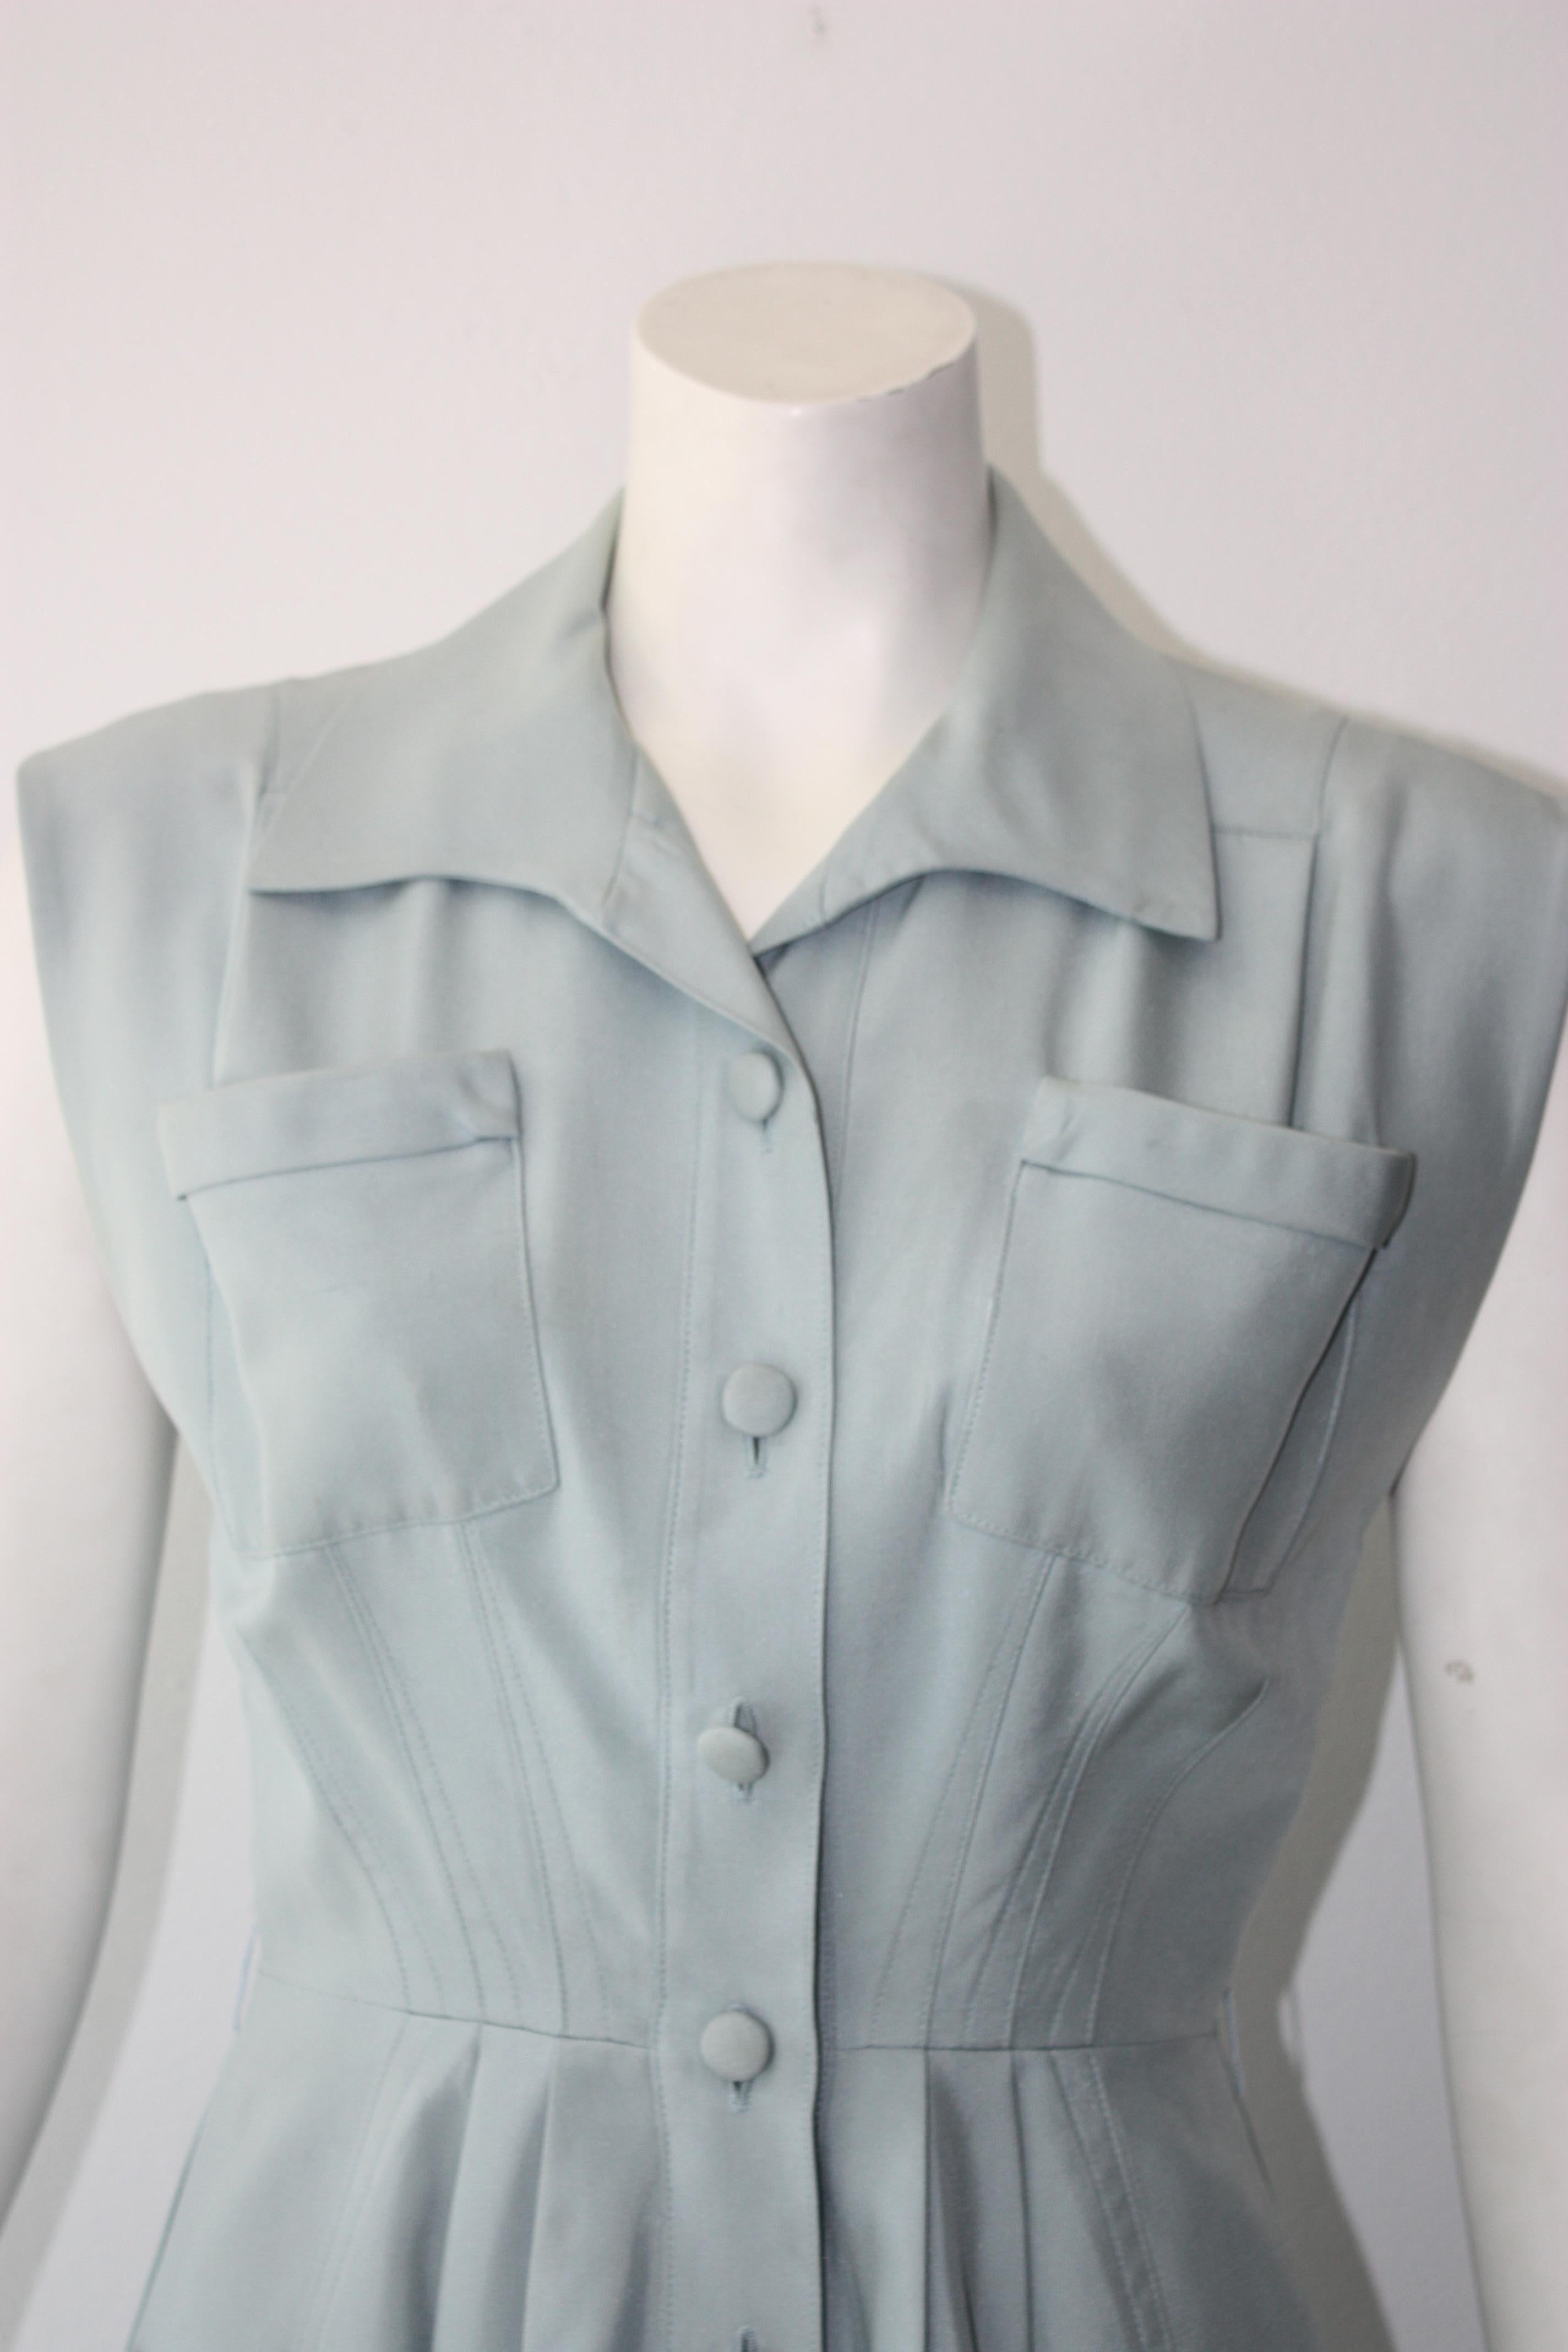 Balenciaga Vintage Dress  In Excellent Condition For Sale In Thousand Oaks, CA